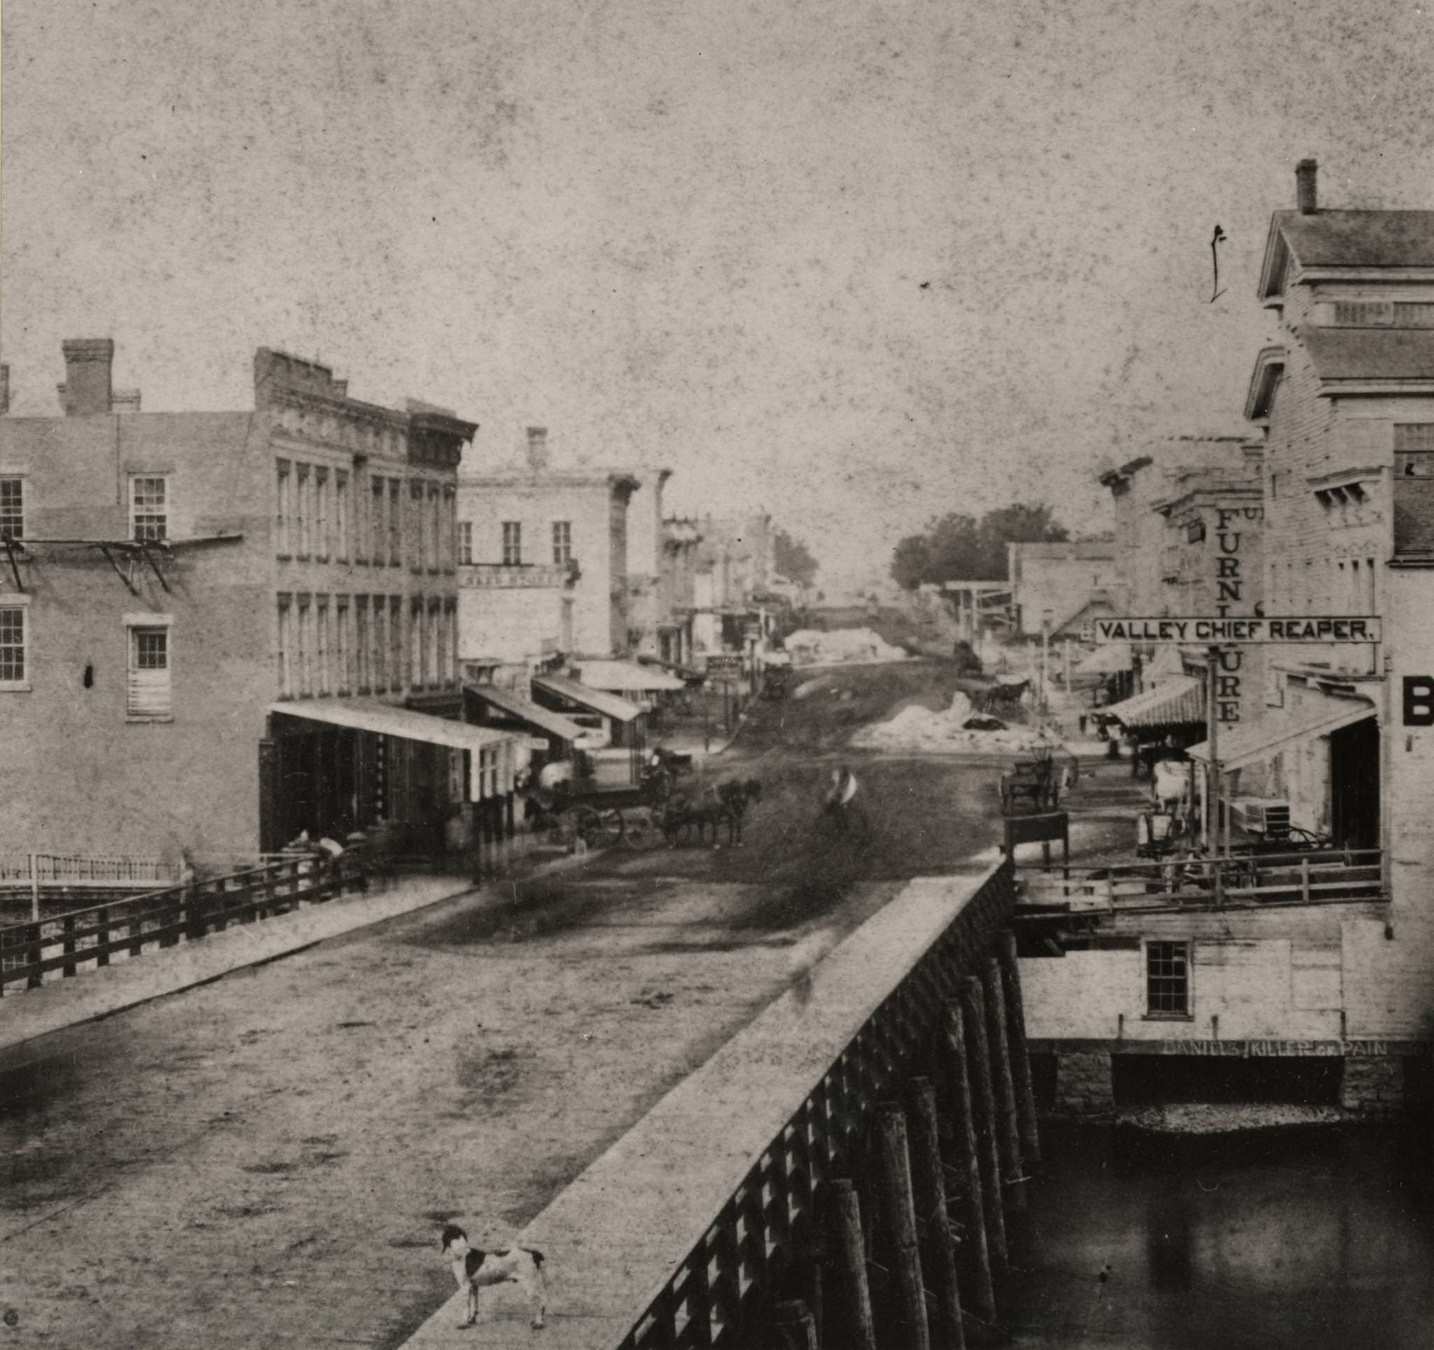 Milwaukee Street looking west with small dog in foreground, Janesville, Wisconsin, 1865.